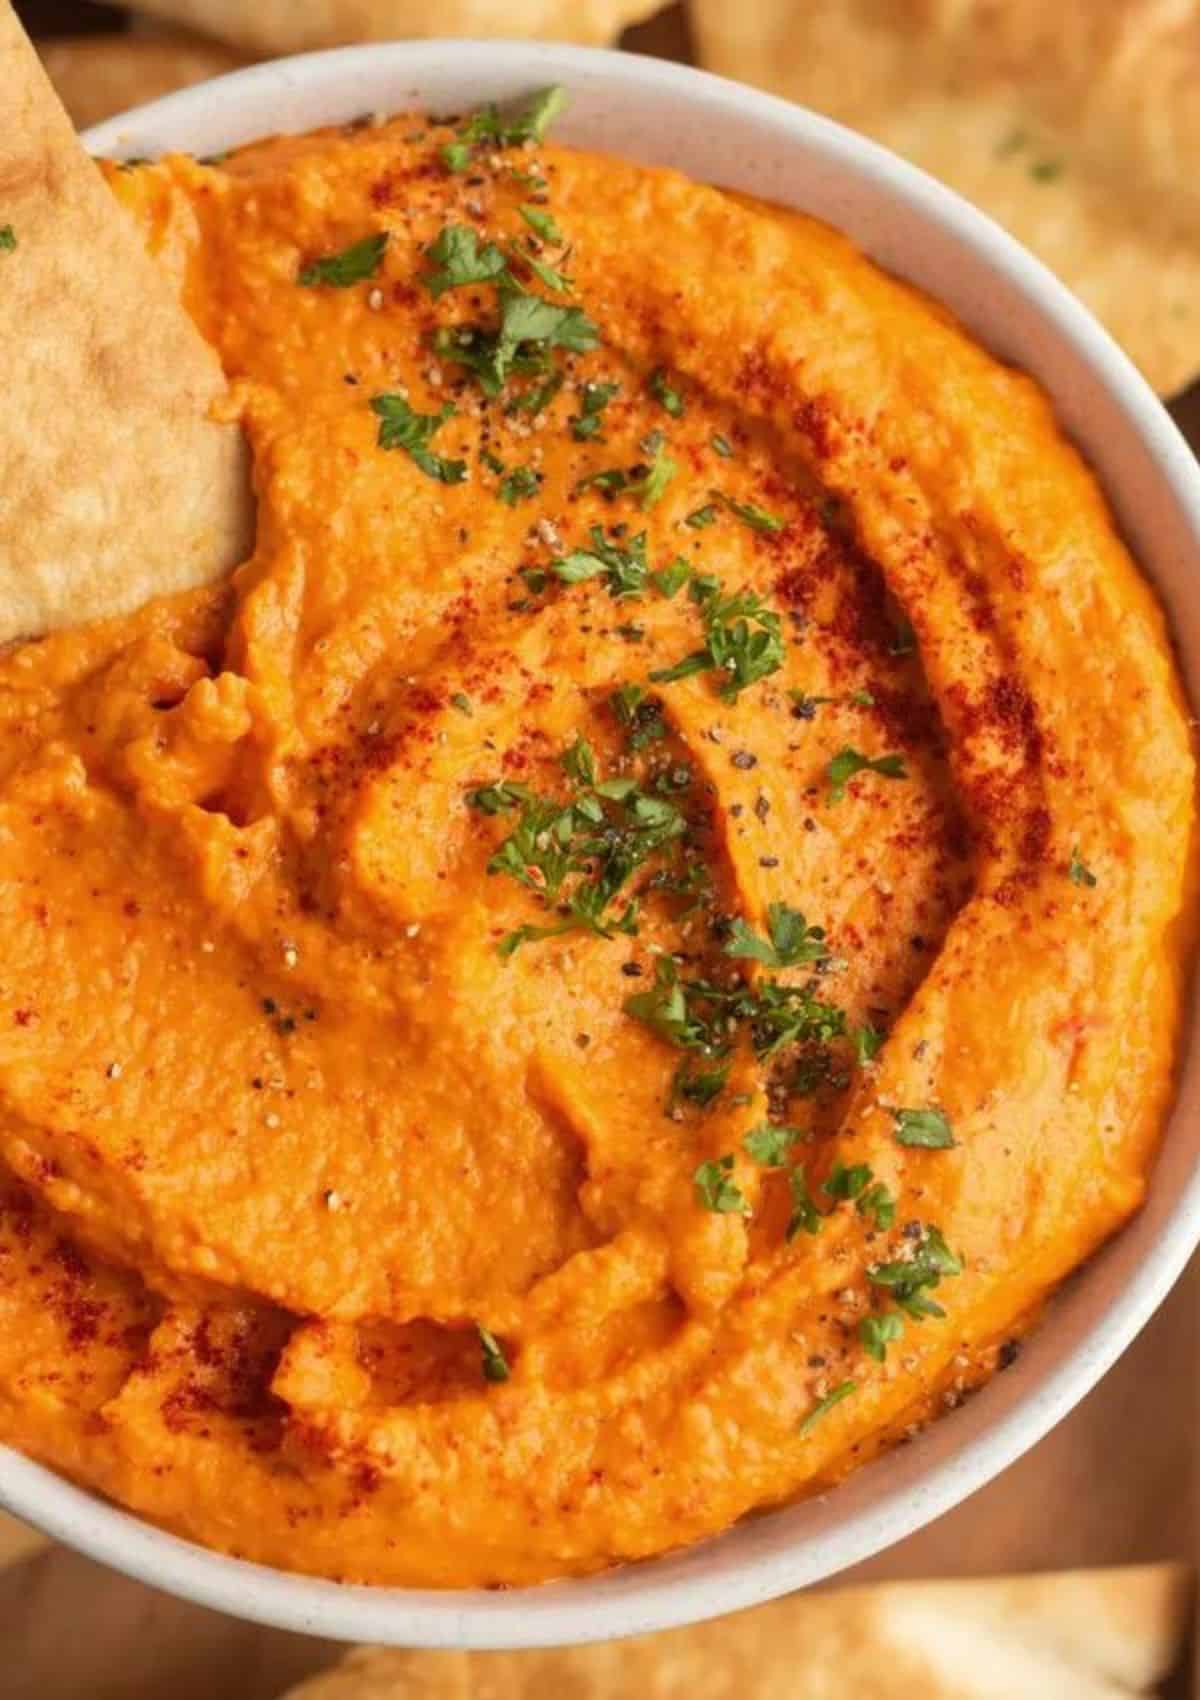 Orange colored dip with green herbs on top and a chip dipped in.